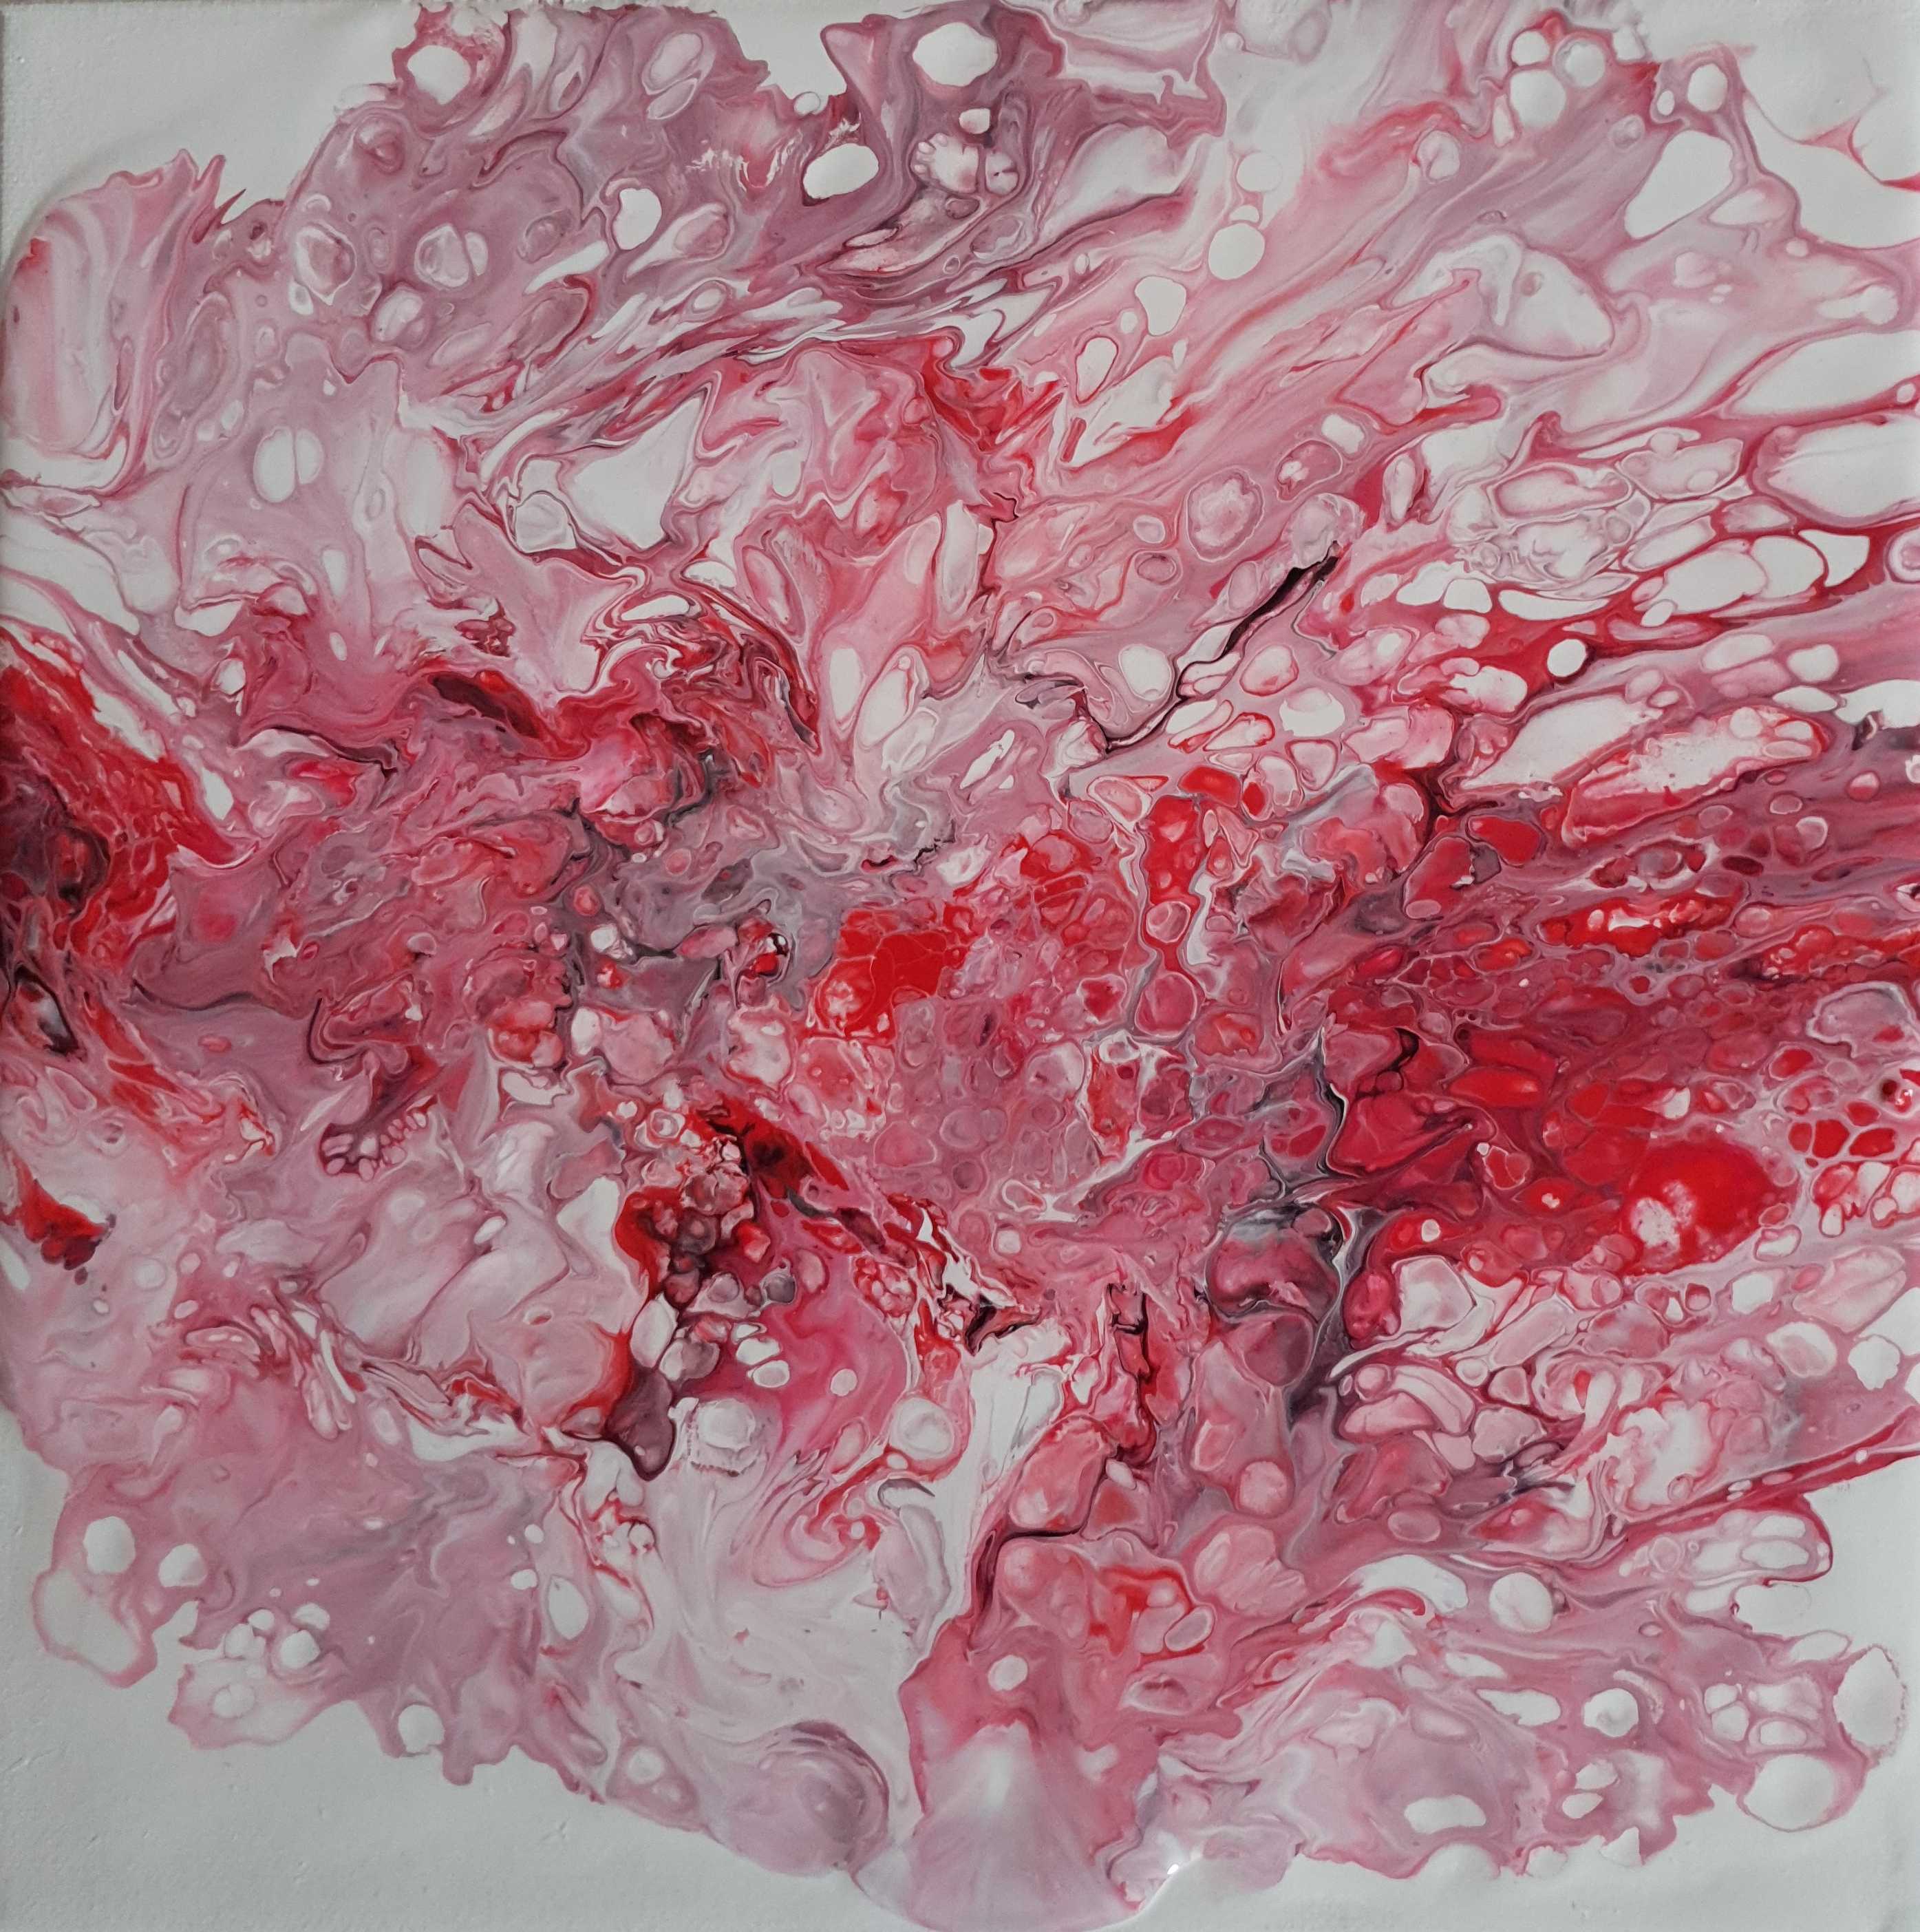 Abstract artwork of ruby